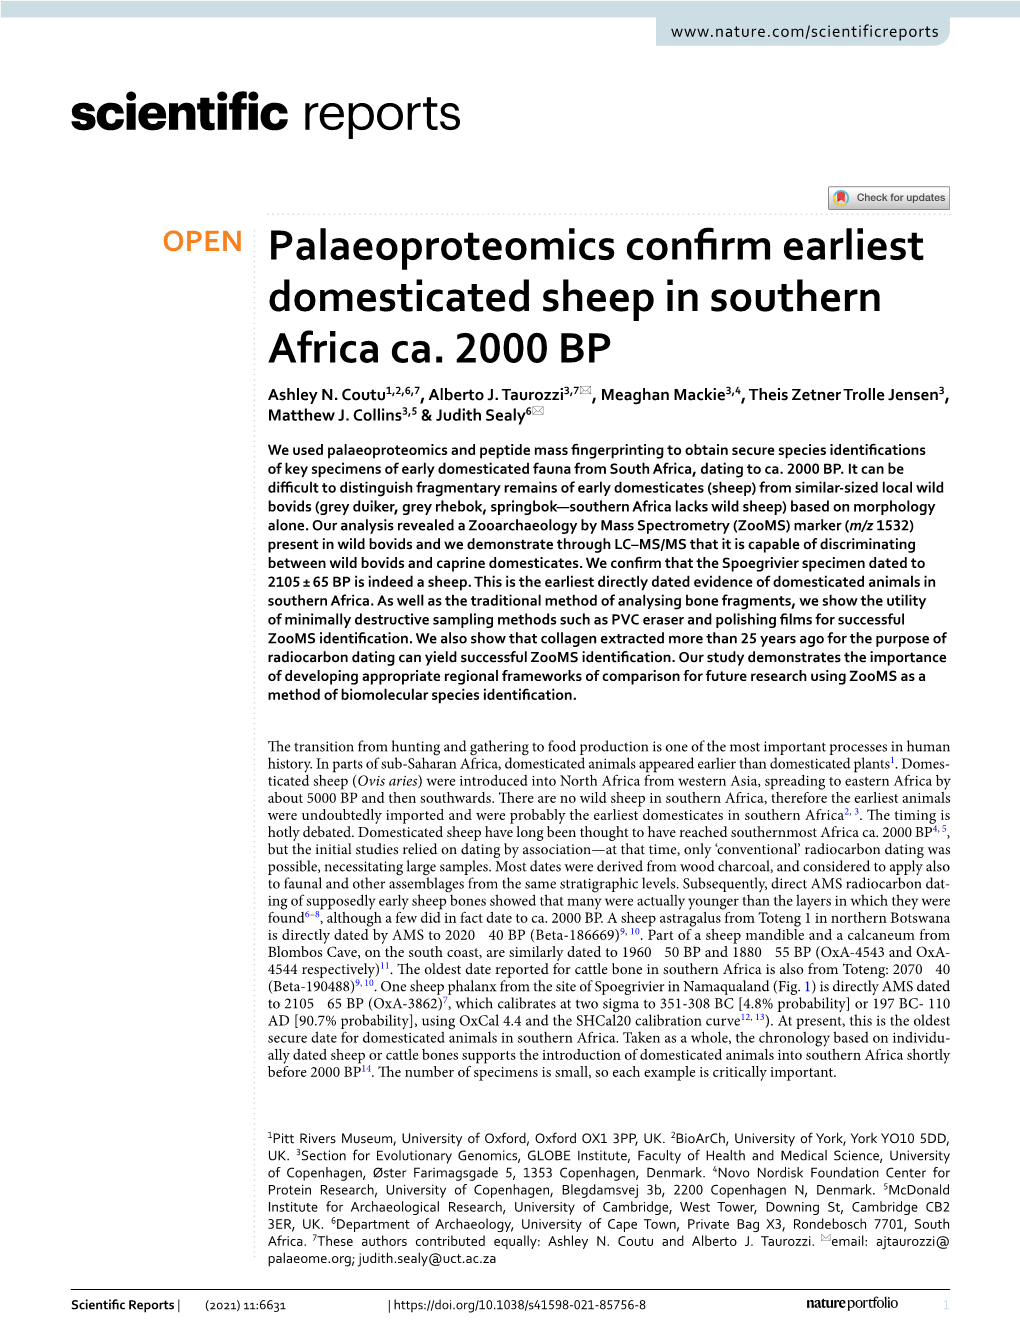 Palaeoproteomics Confirm Earliest Domesticated Sheep in Southern